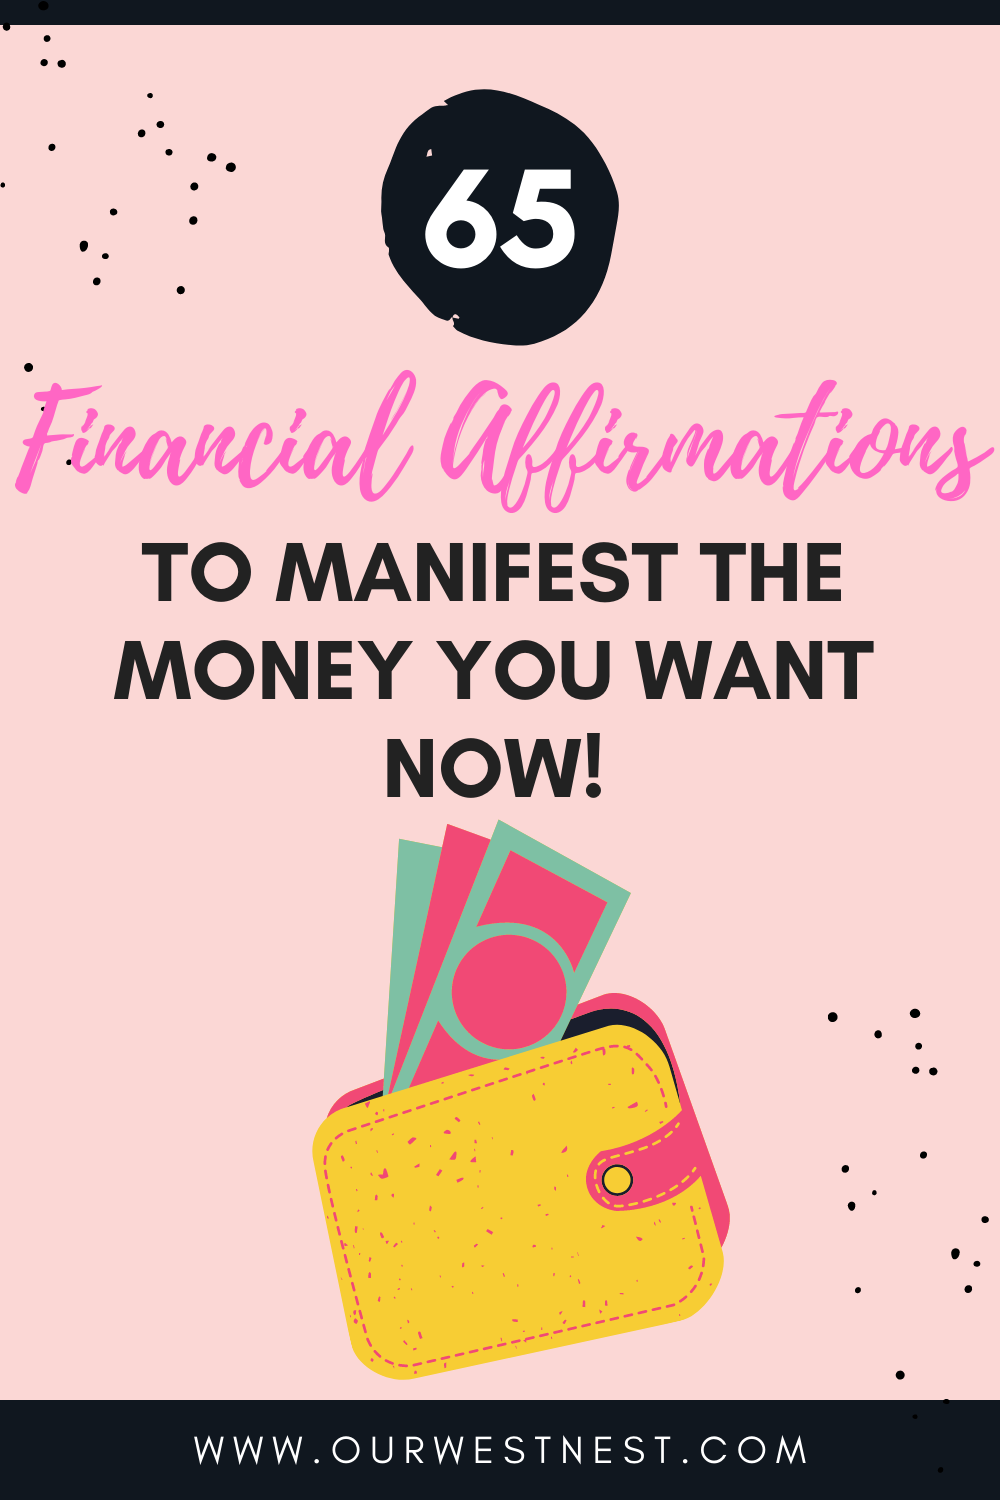 What Make Wealth Manifestation Don't Want You To Know